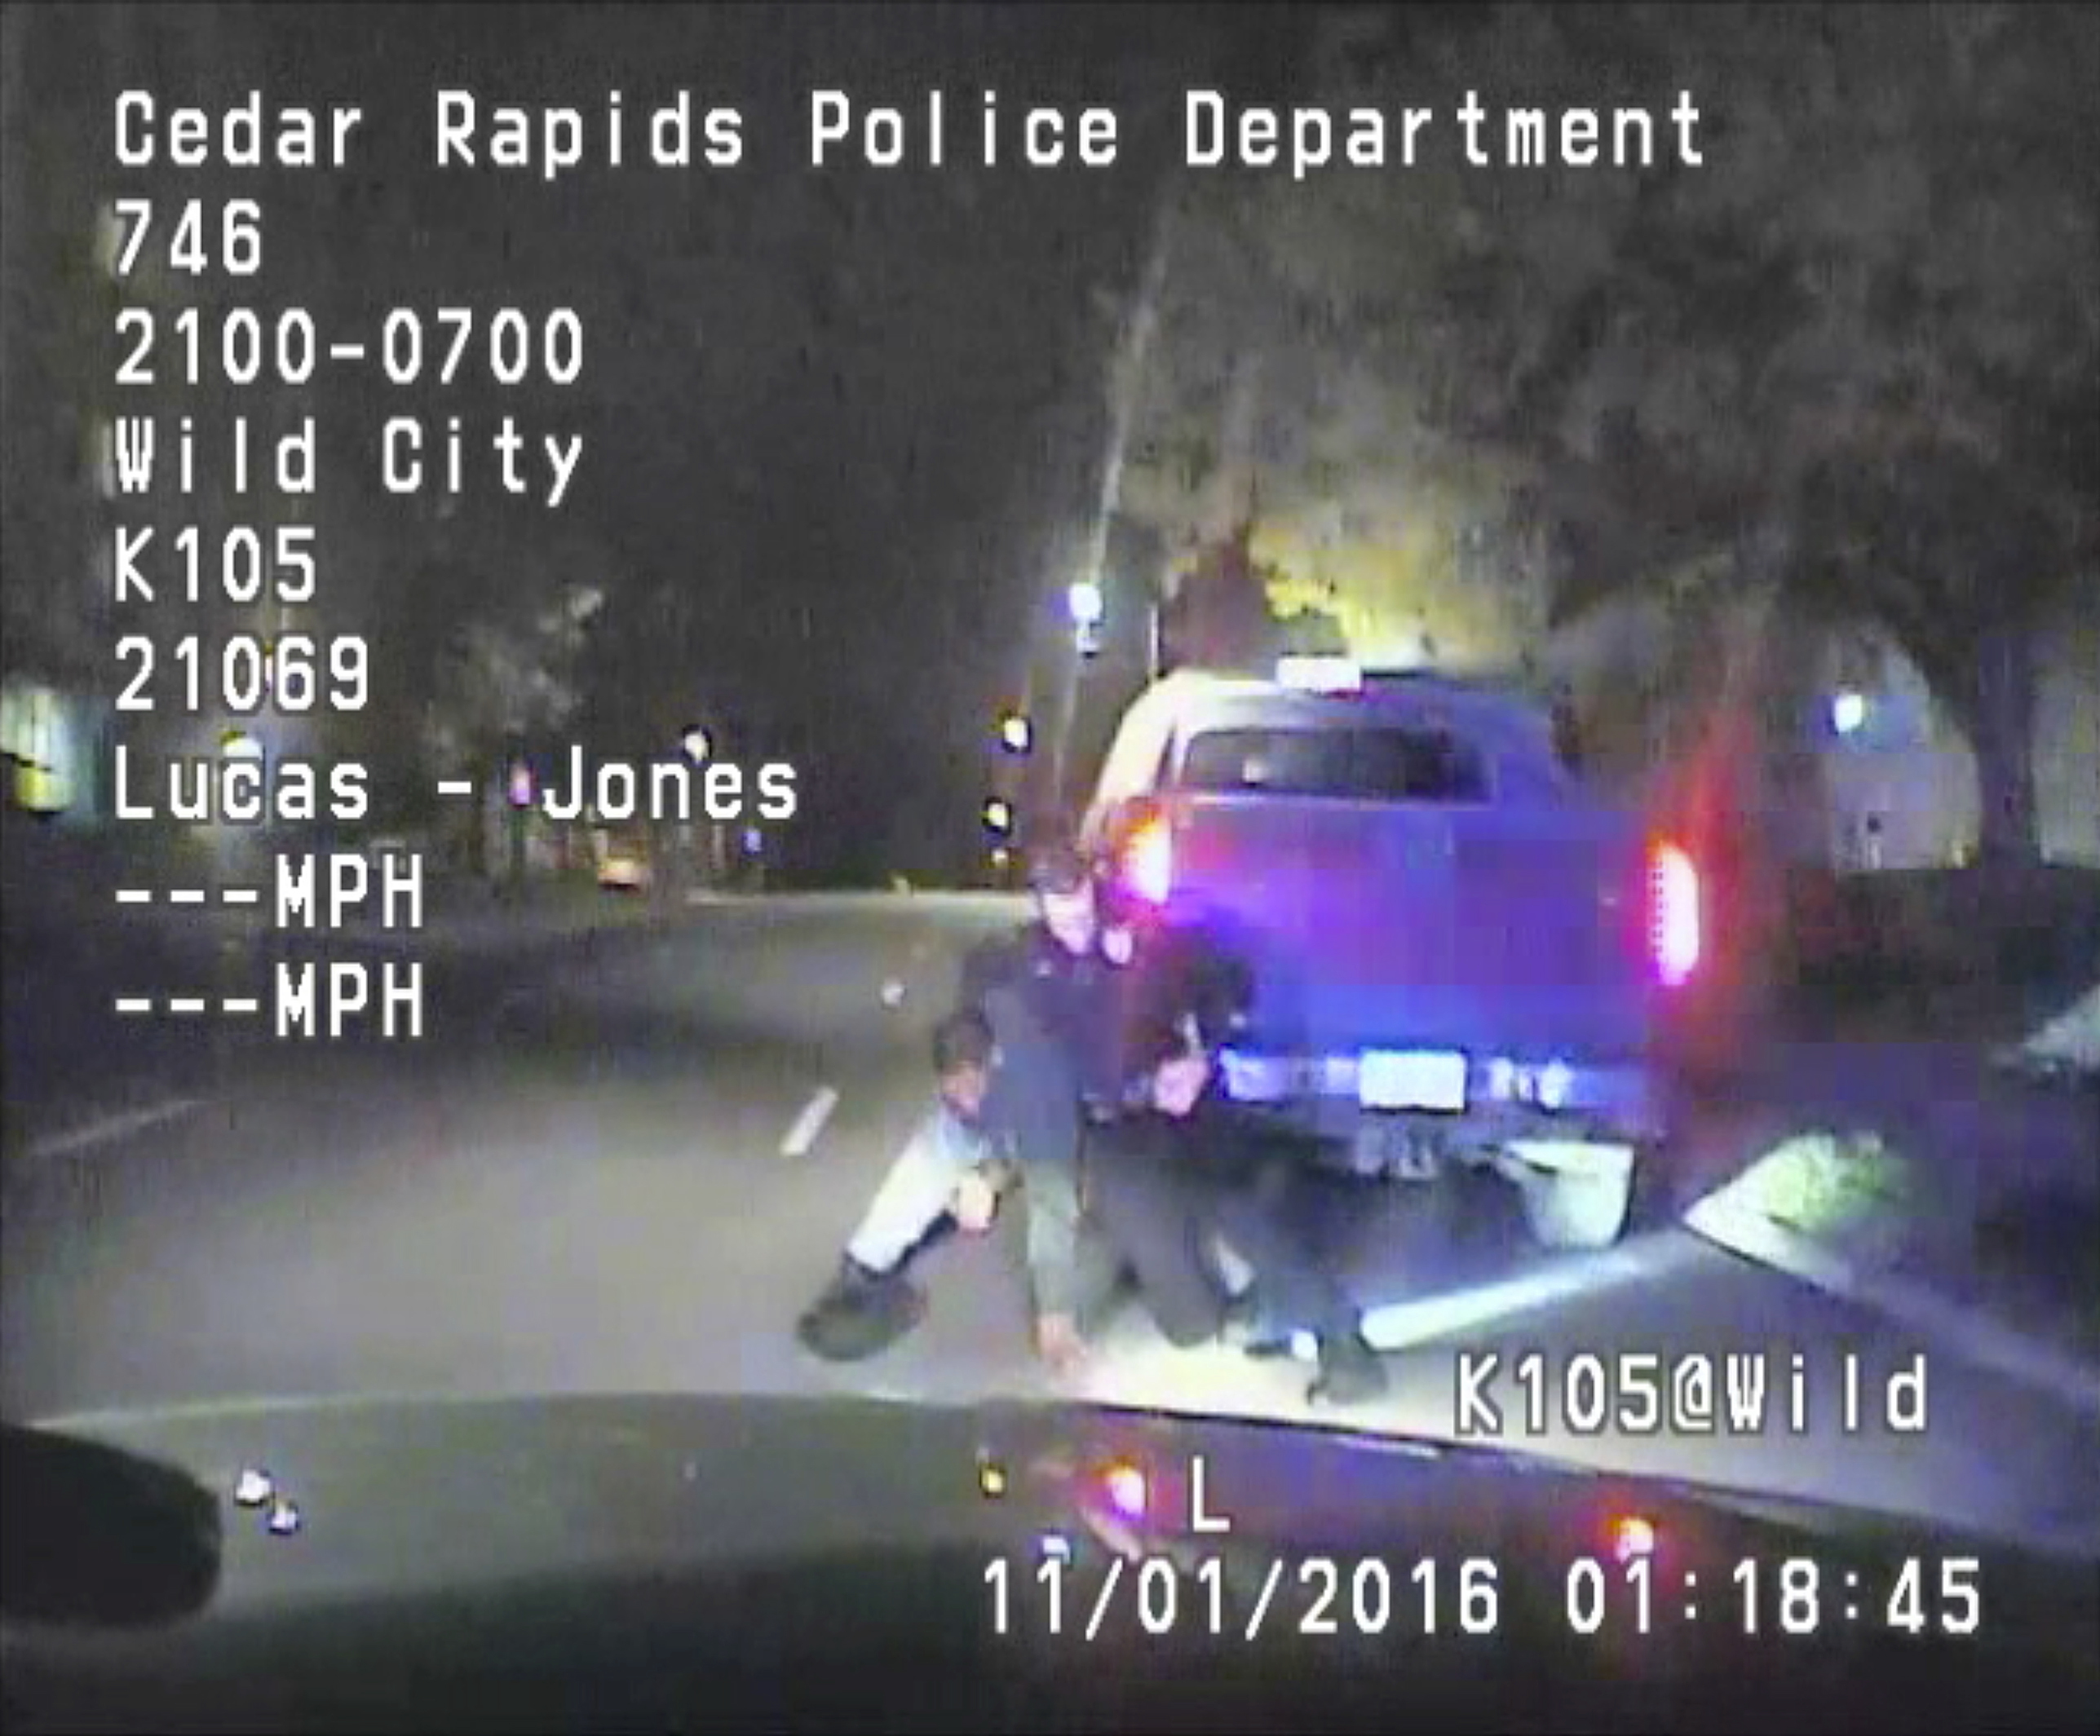 In this image made from a Nov. 1, 2016 dashcam video released Thursday, Dec. 8, 2016, by Cedar Rapids Police Department, an unarmed black motorist struggles with an Iowa officer and a police dog before the driver is shot and paralyzed. The video shows that 37-year-old Jerime Mitchell rushes back to his pickup truck and Cedar Rapids officer Lucas Jones shoots him as the vehicle rolls away. (Cedar Rapids Police Department via AP)